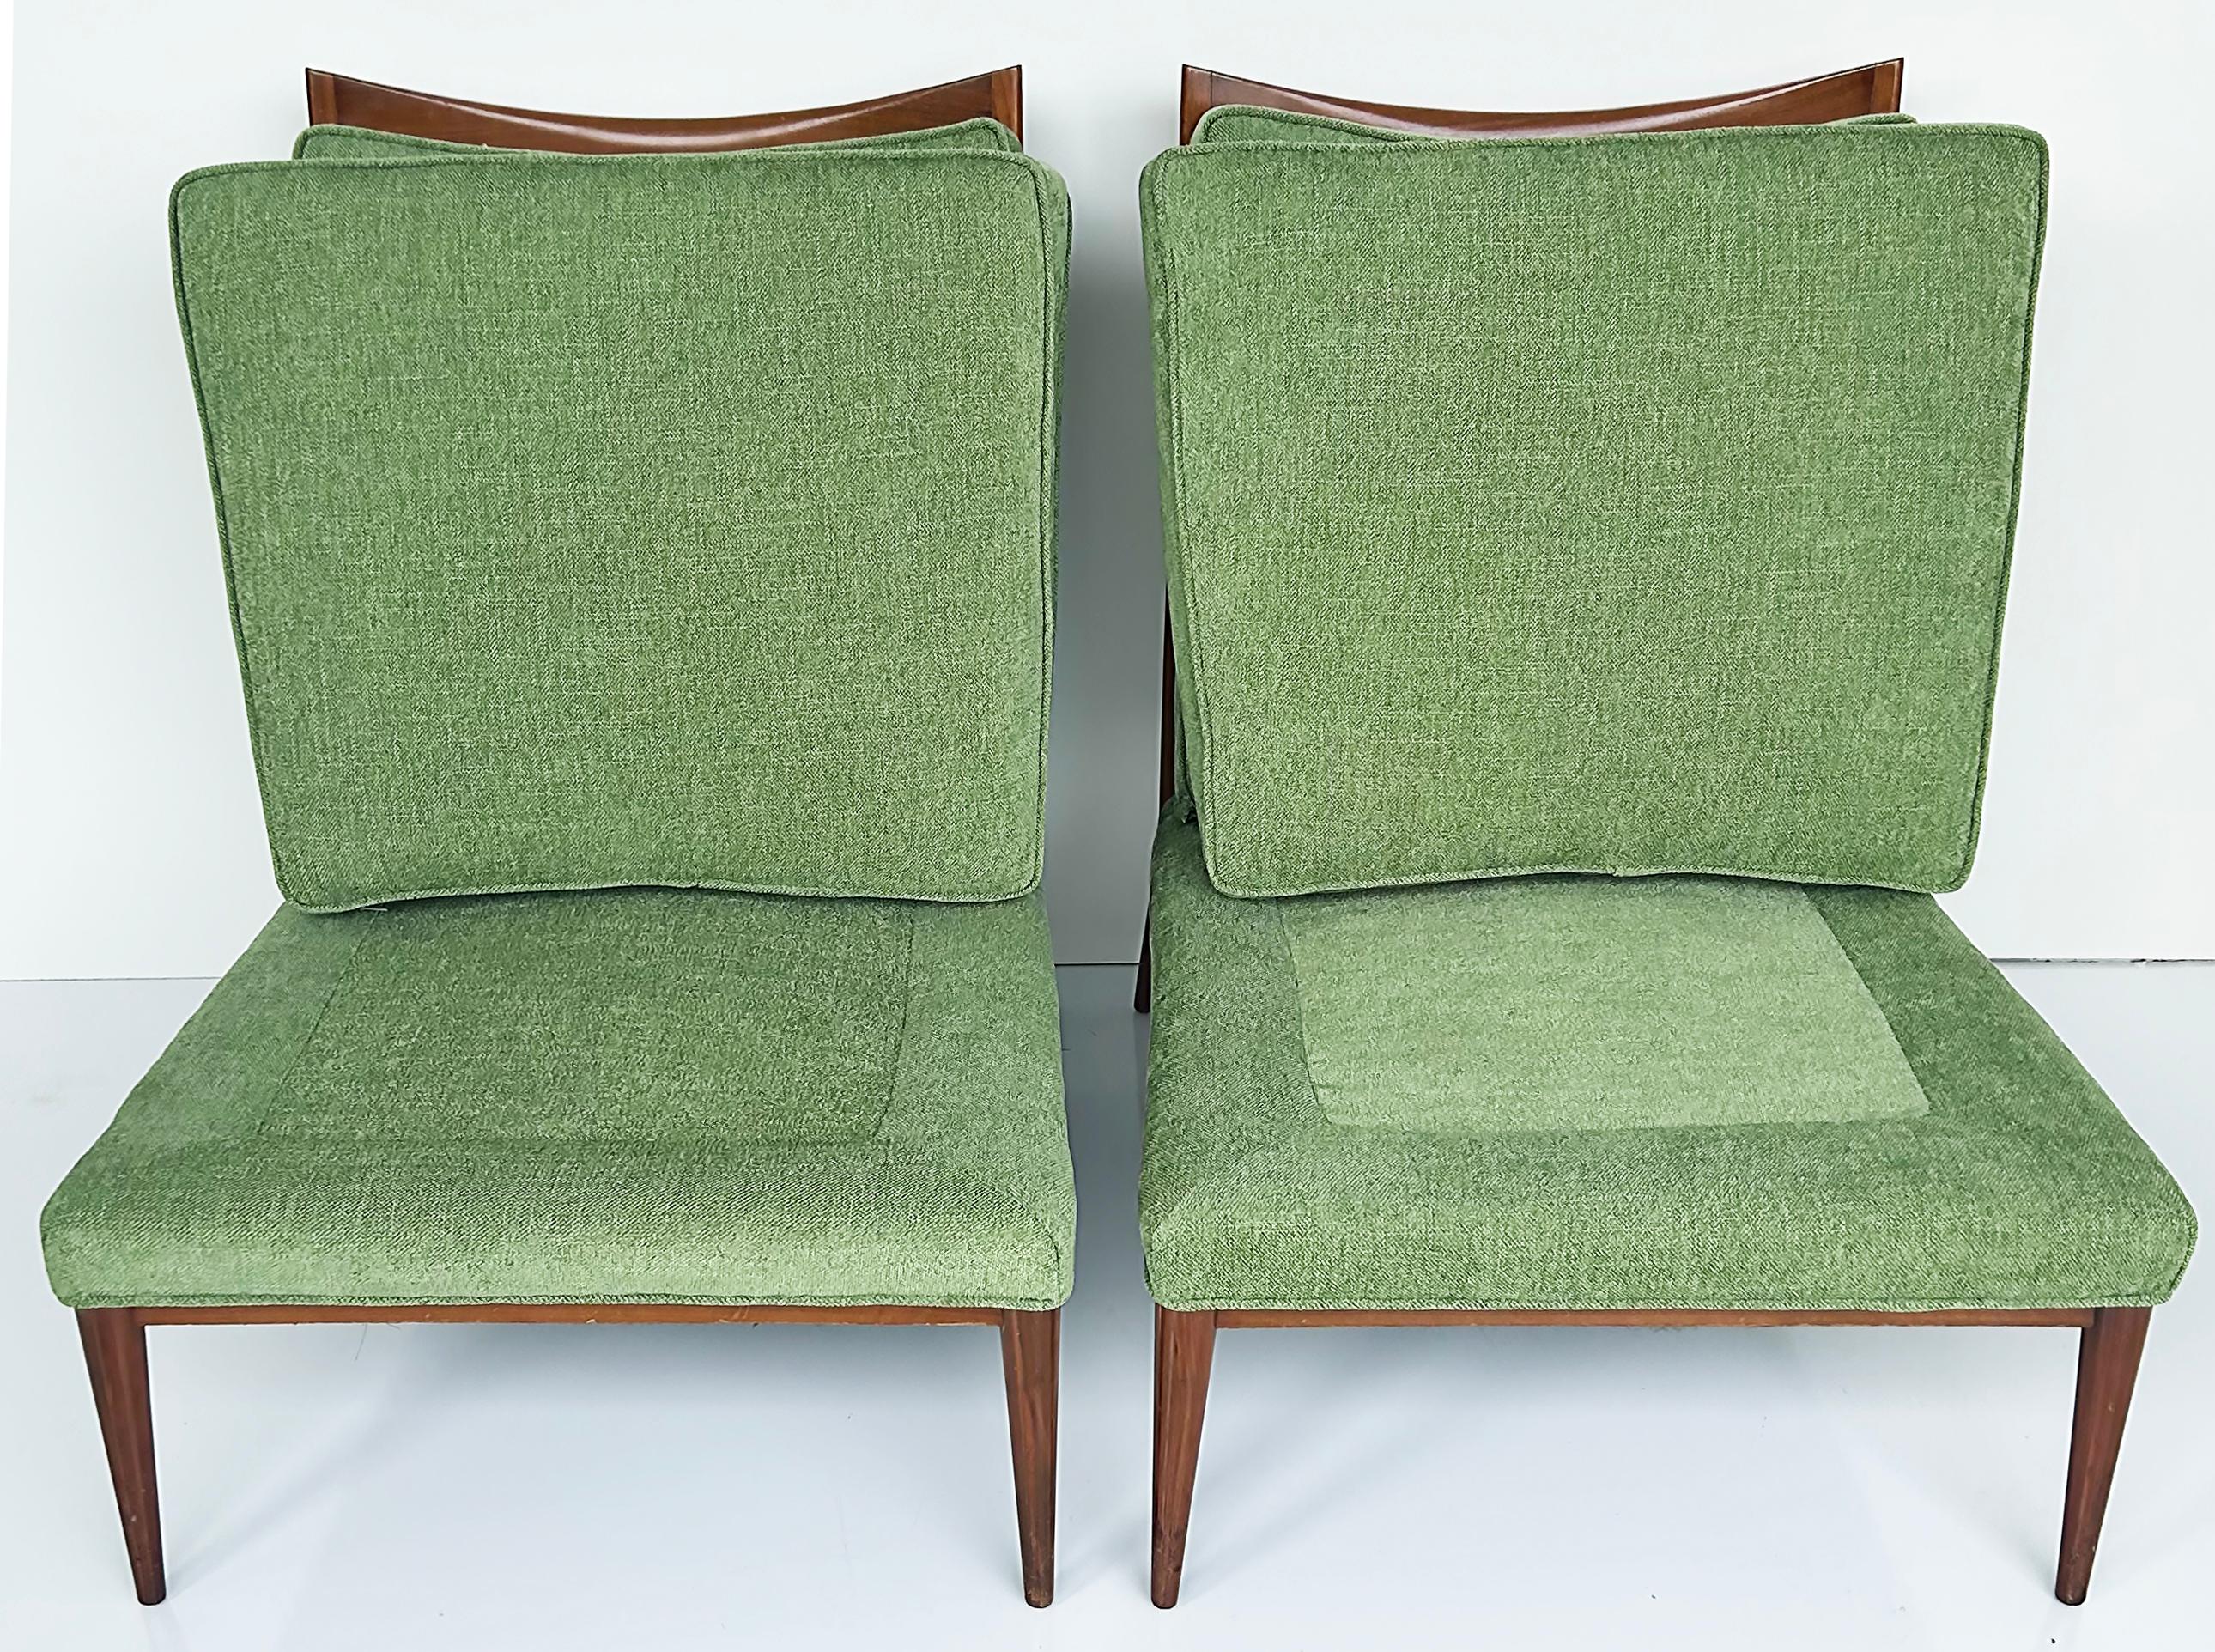 1950s Paul McCobb Directional Walnut Slipper Chairs, Pair Newly Upholstered  For Sale 5